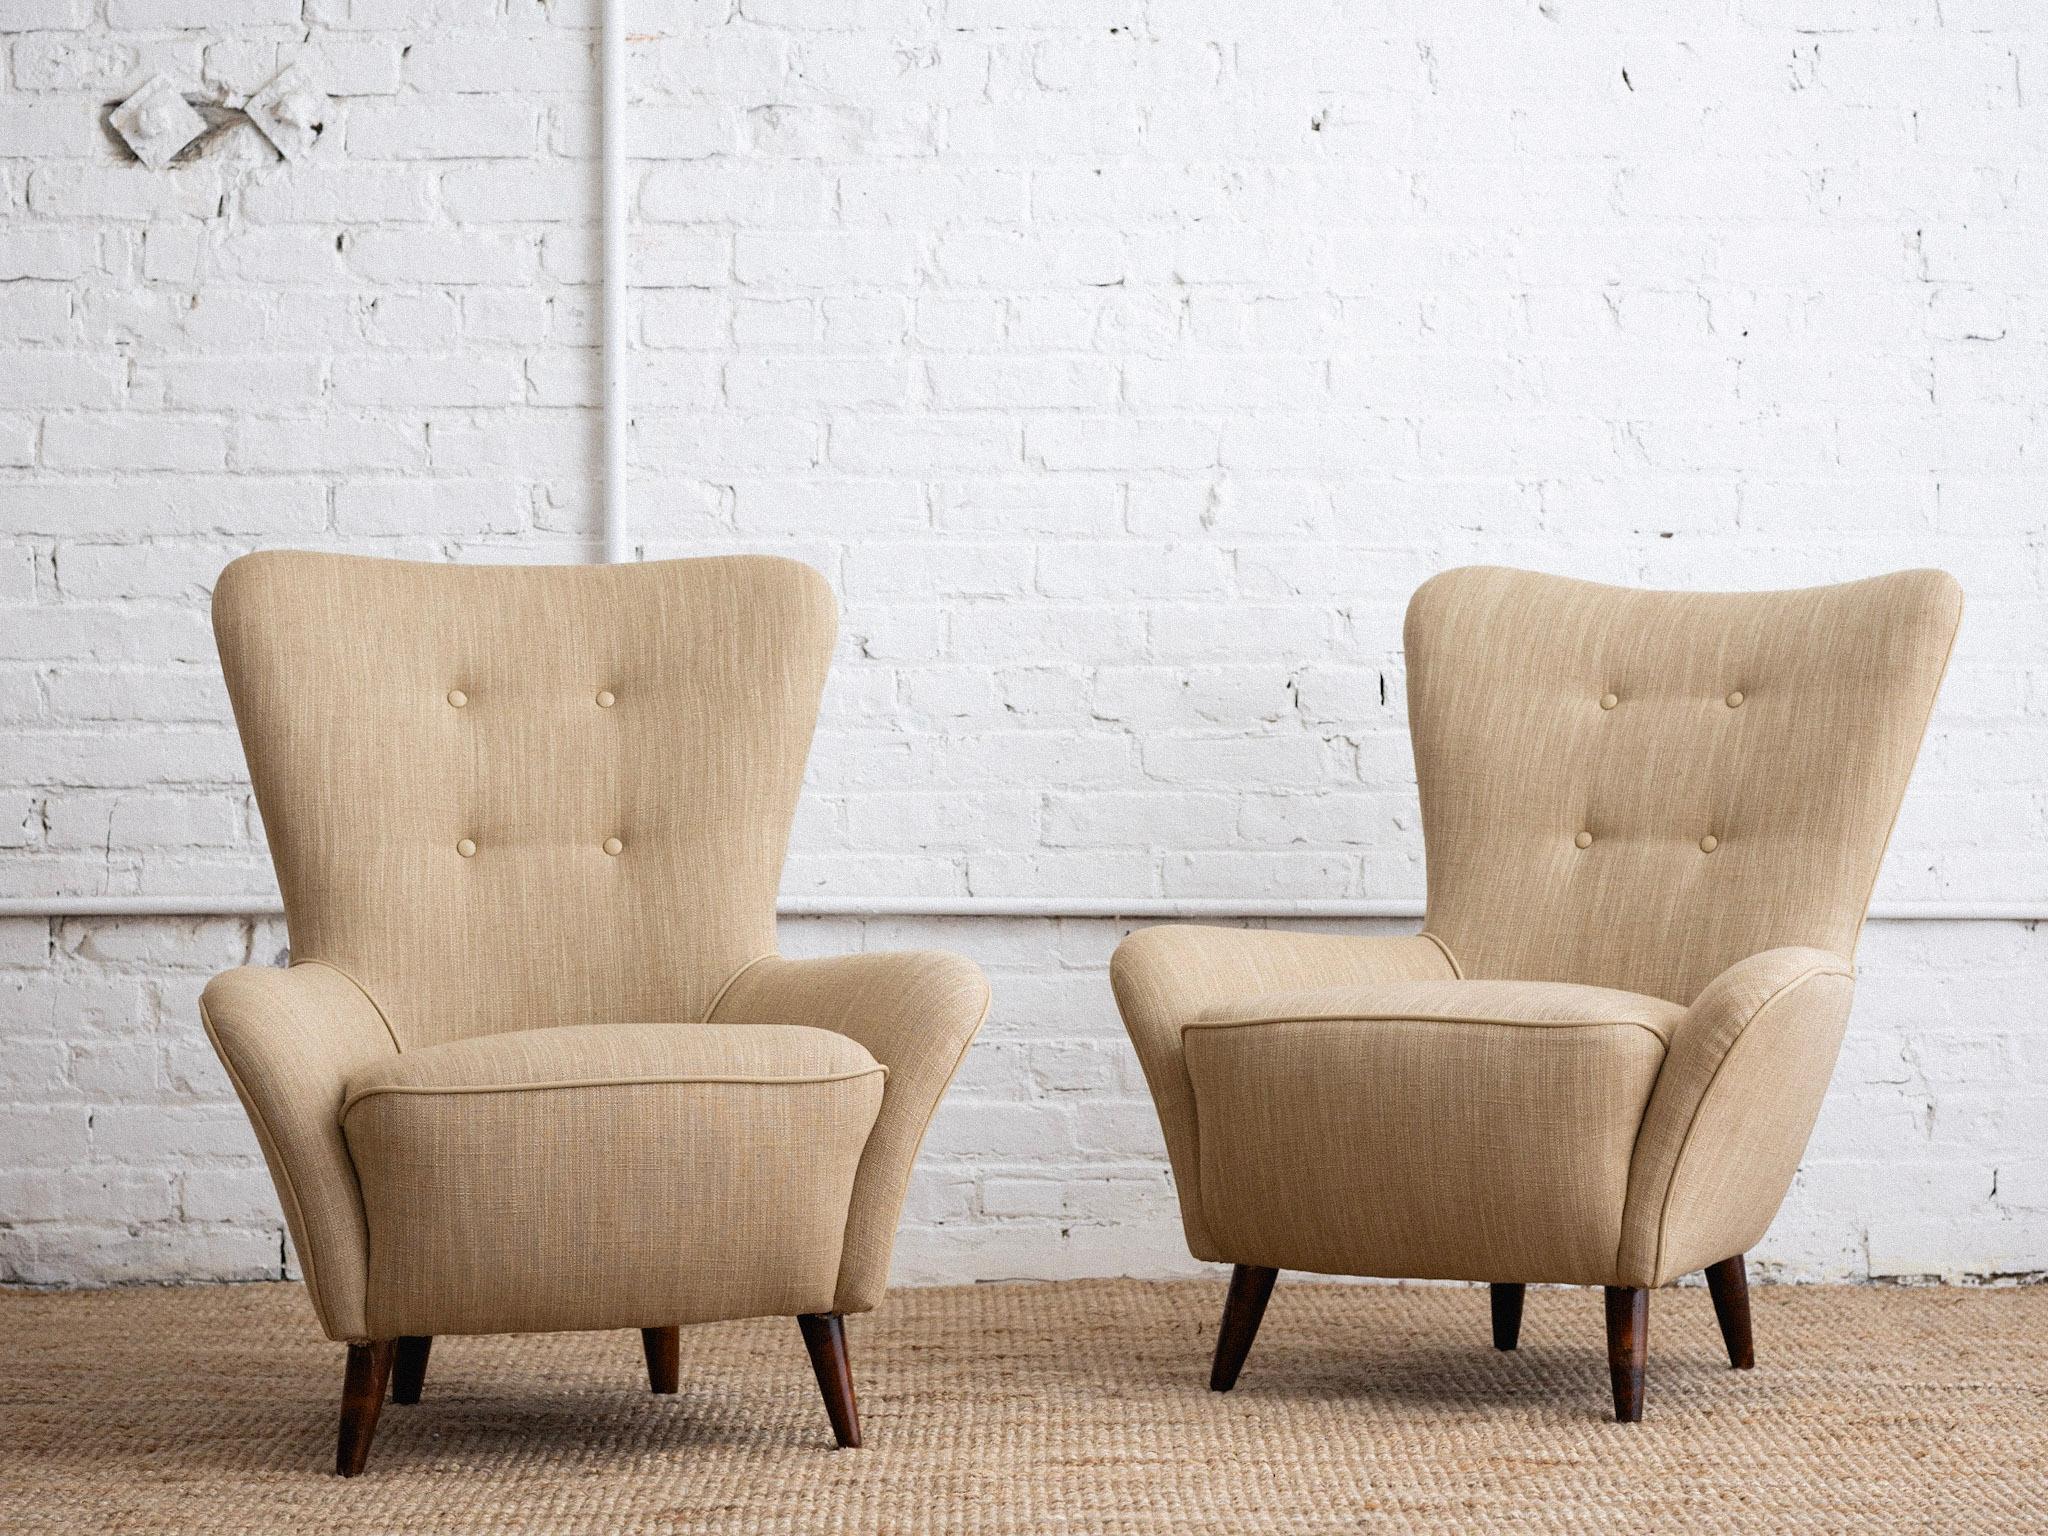 A pair of petite mid century Italian armchairs. Low profile wingback silhouette. Newly upholstered in a beige linen blend and matching leather trim. Sourced in Northern Italy.